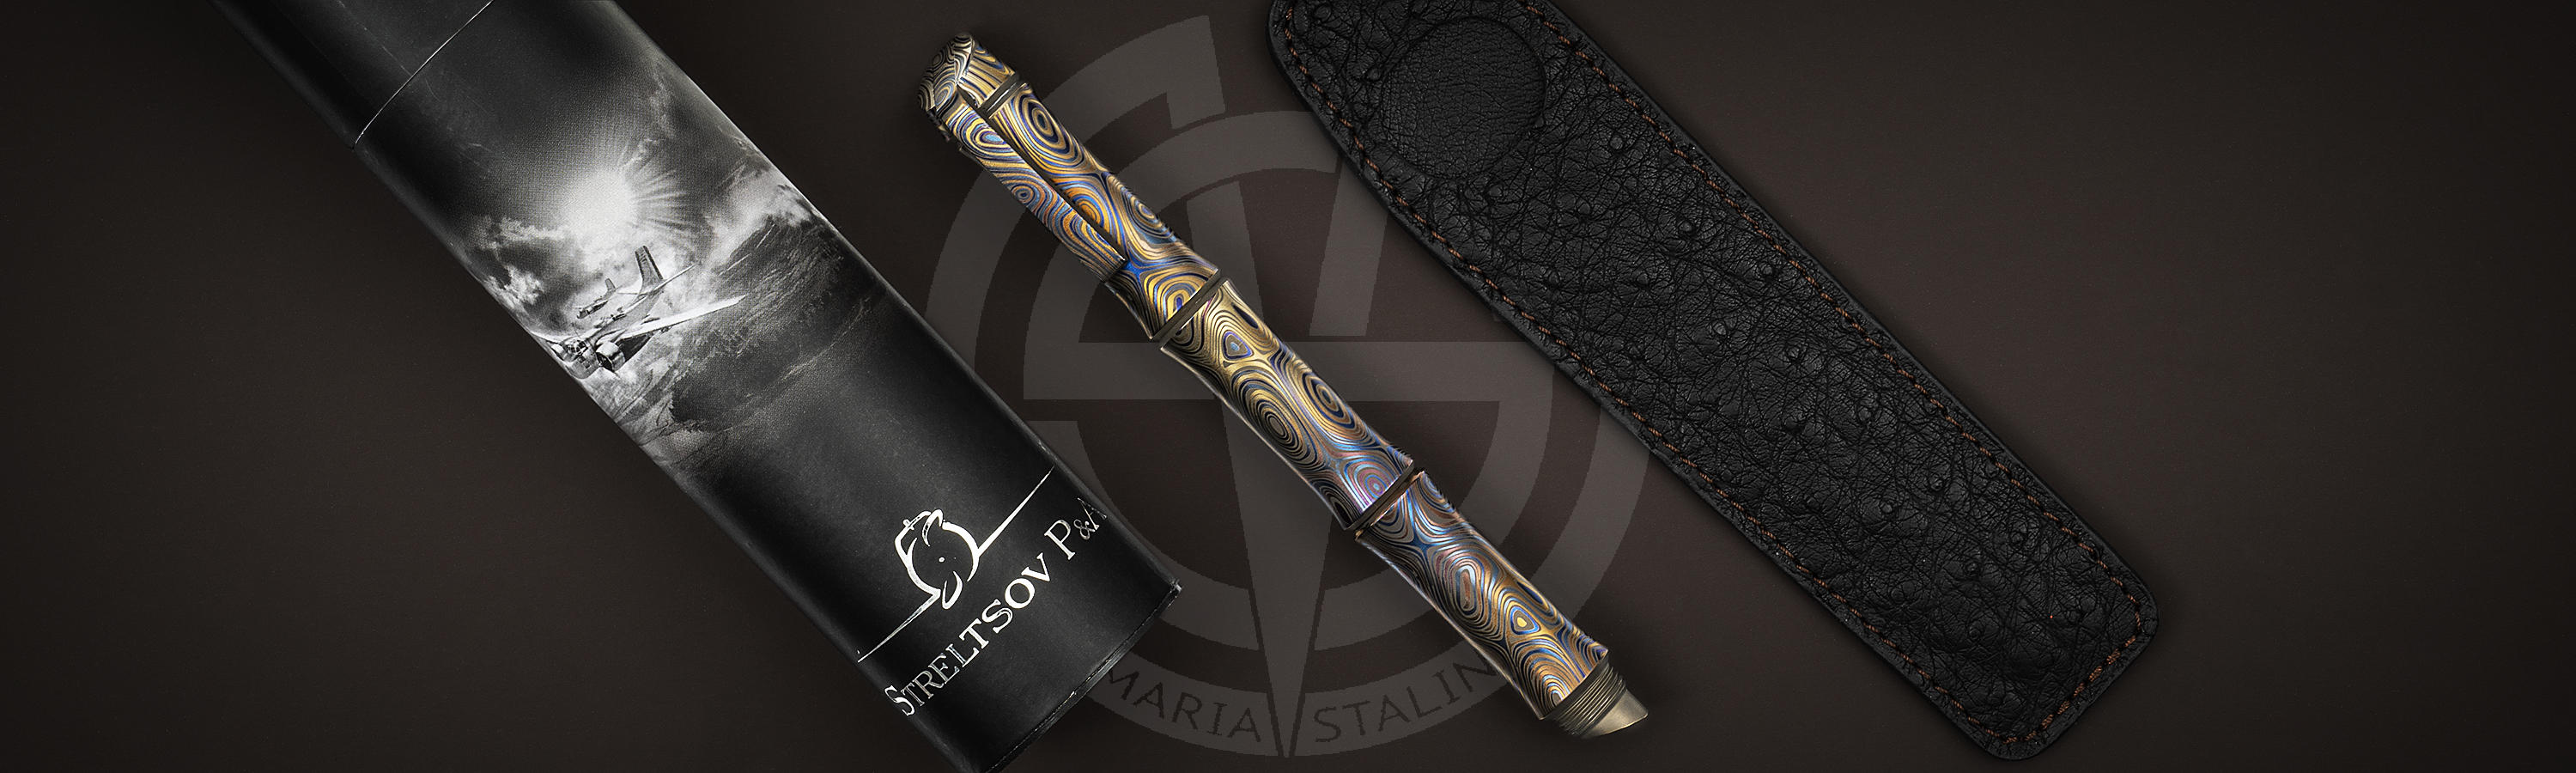 Kamikaze Klimt Blue pen comes with a tube and leather case